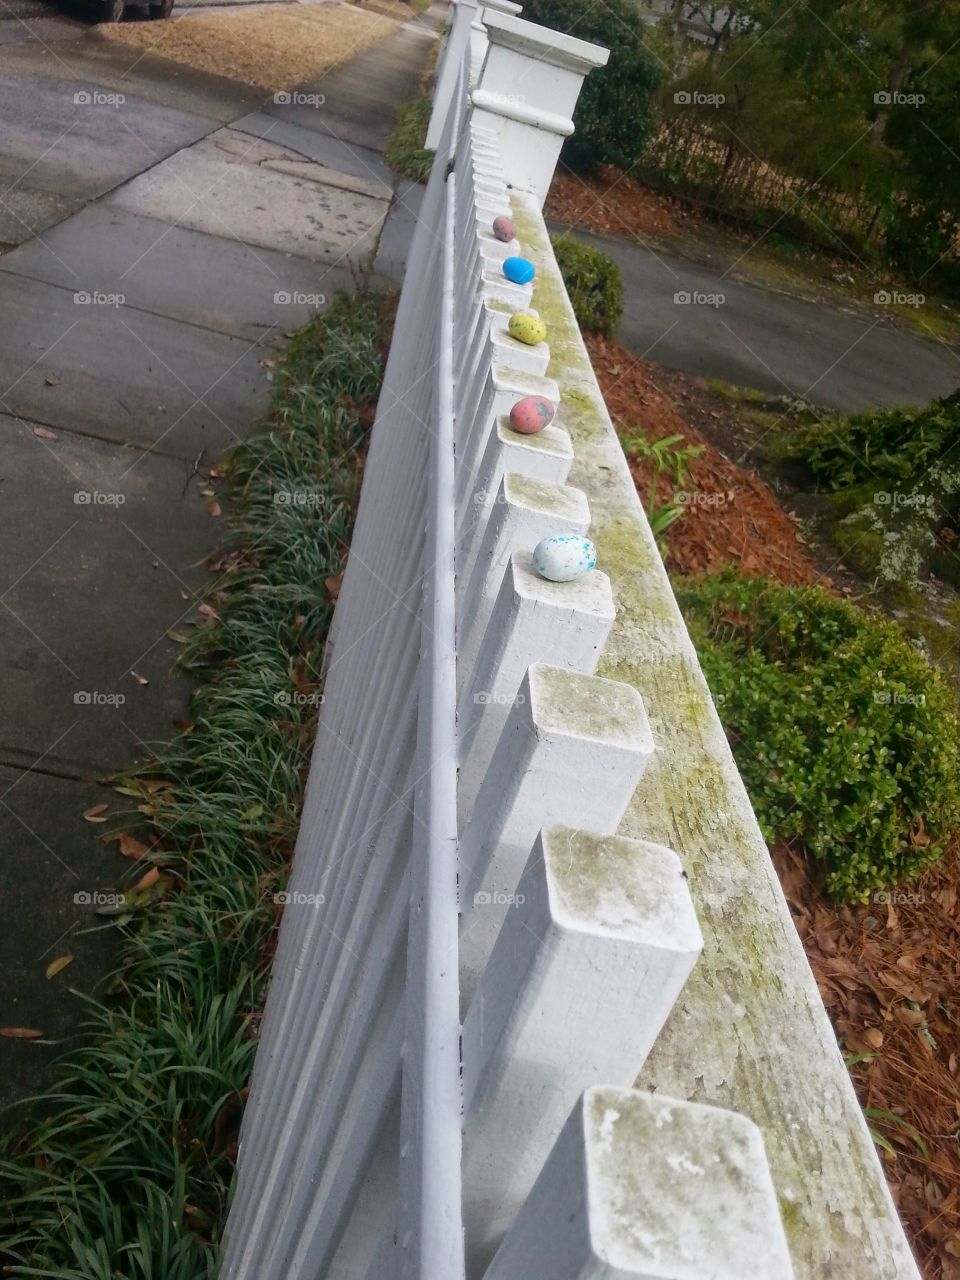 Easter fence. Easter bunny been lefted eggs